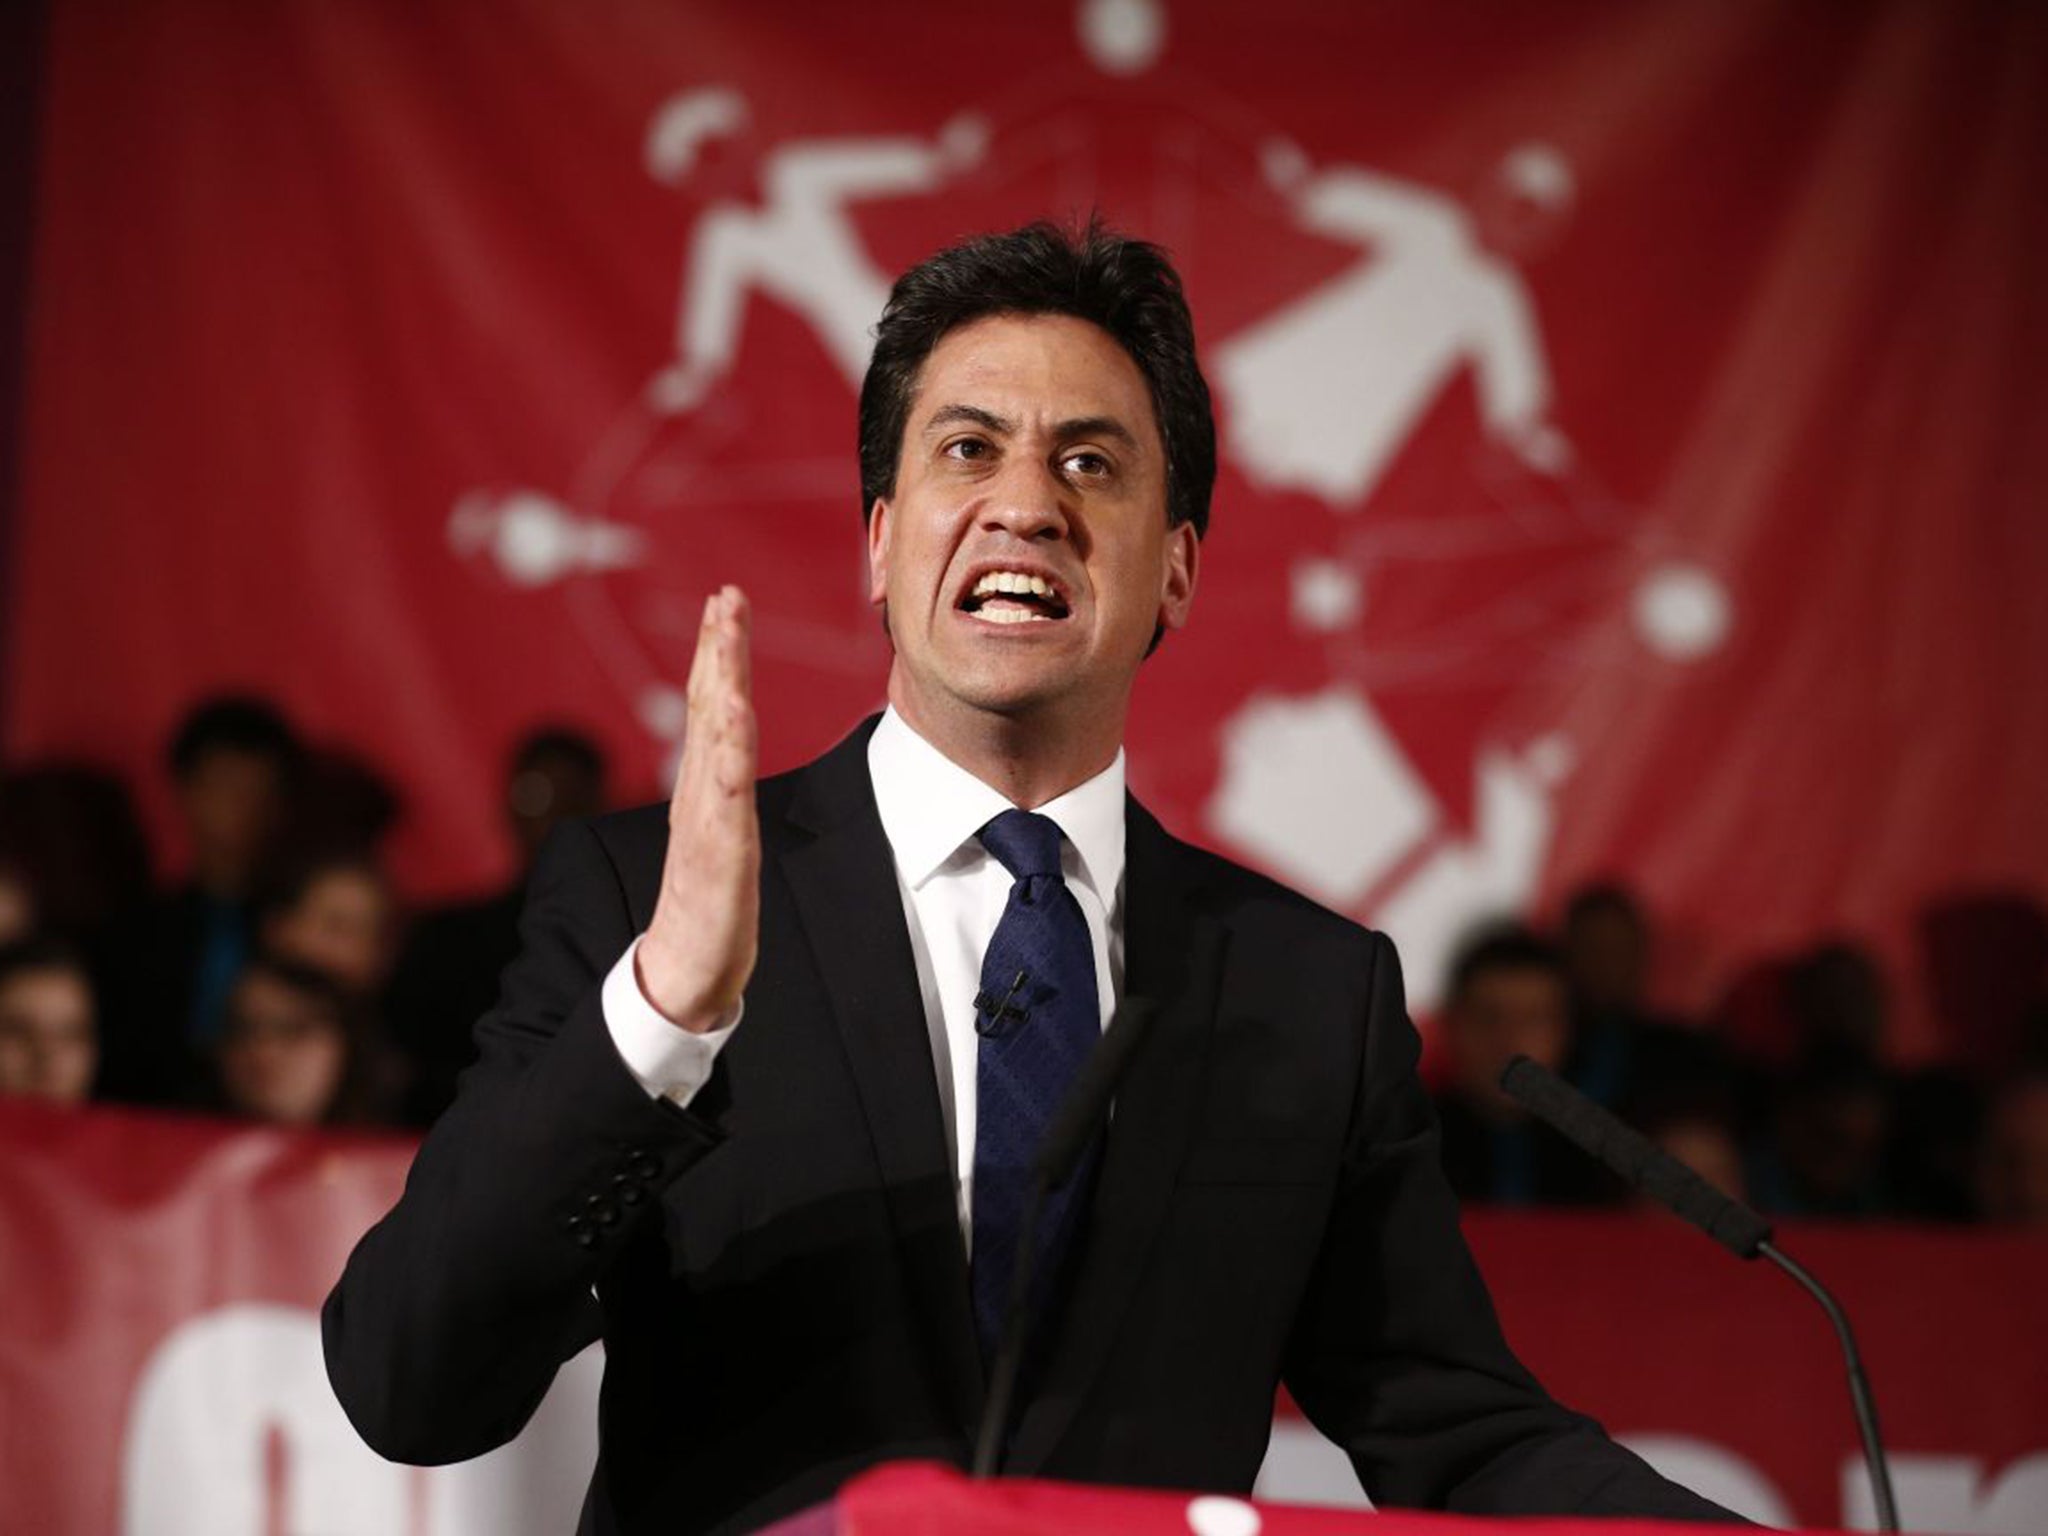 Ed Miliband and Labour hold the view that a prime minister should resign if it is clear he is unlikely to command the confidence of the Commons